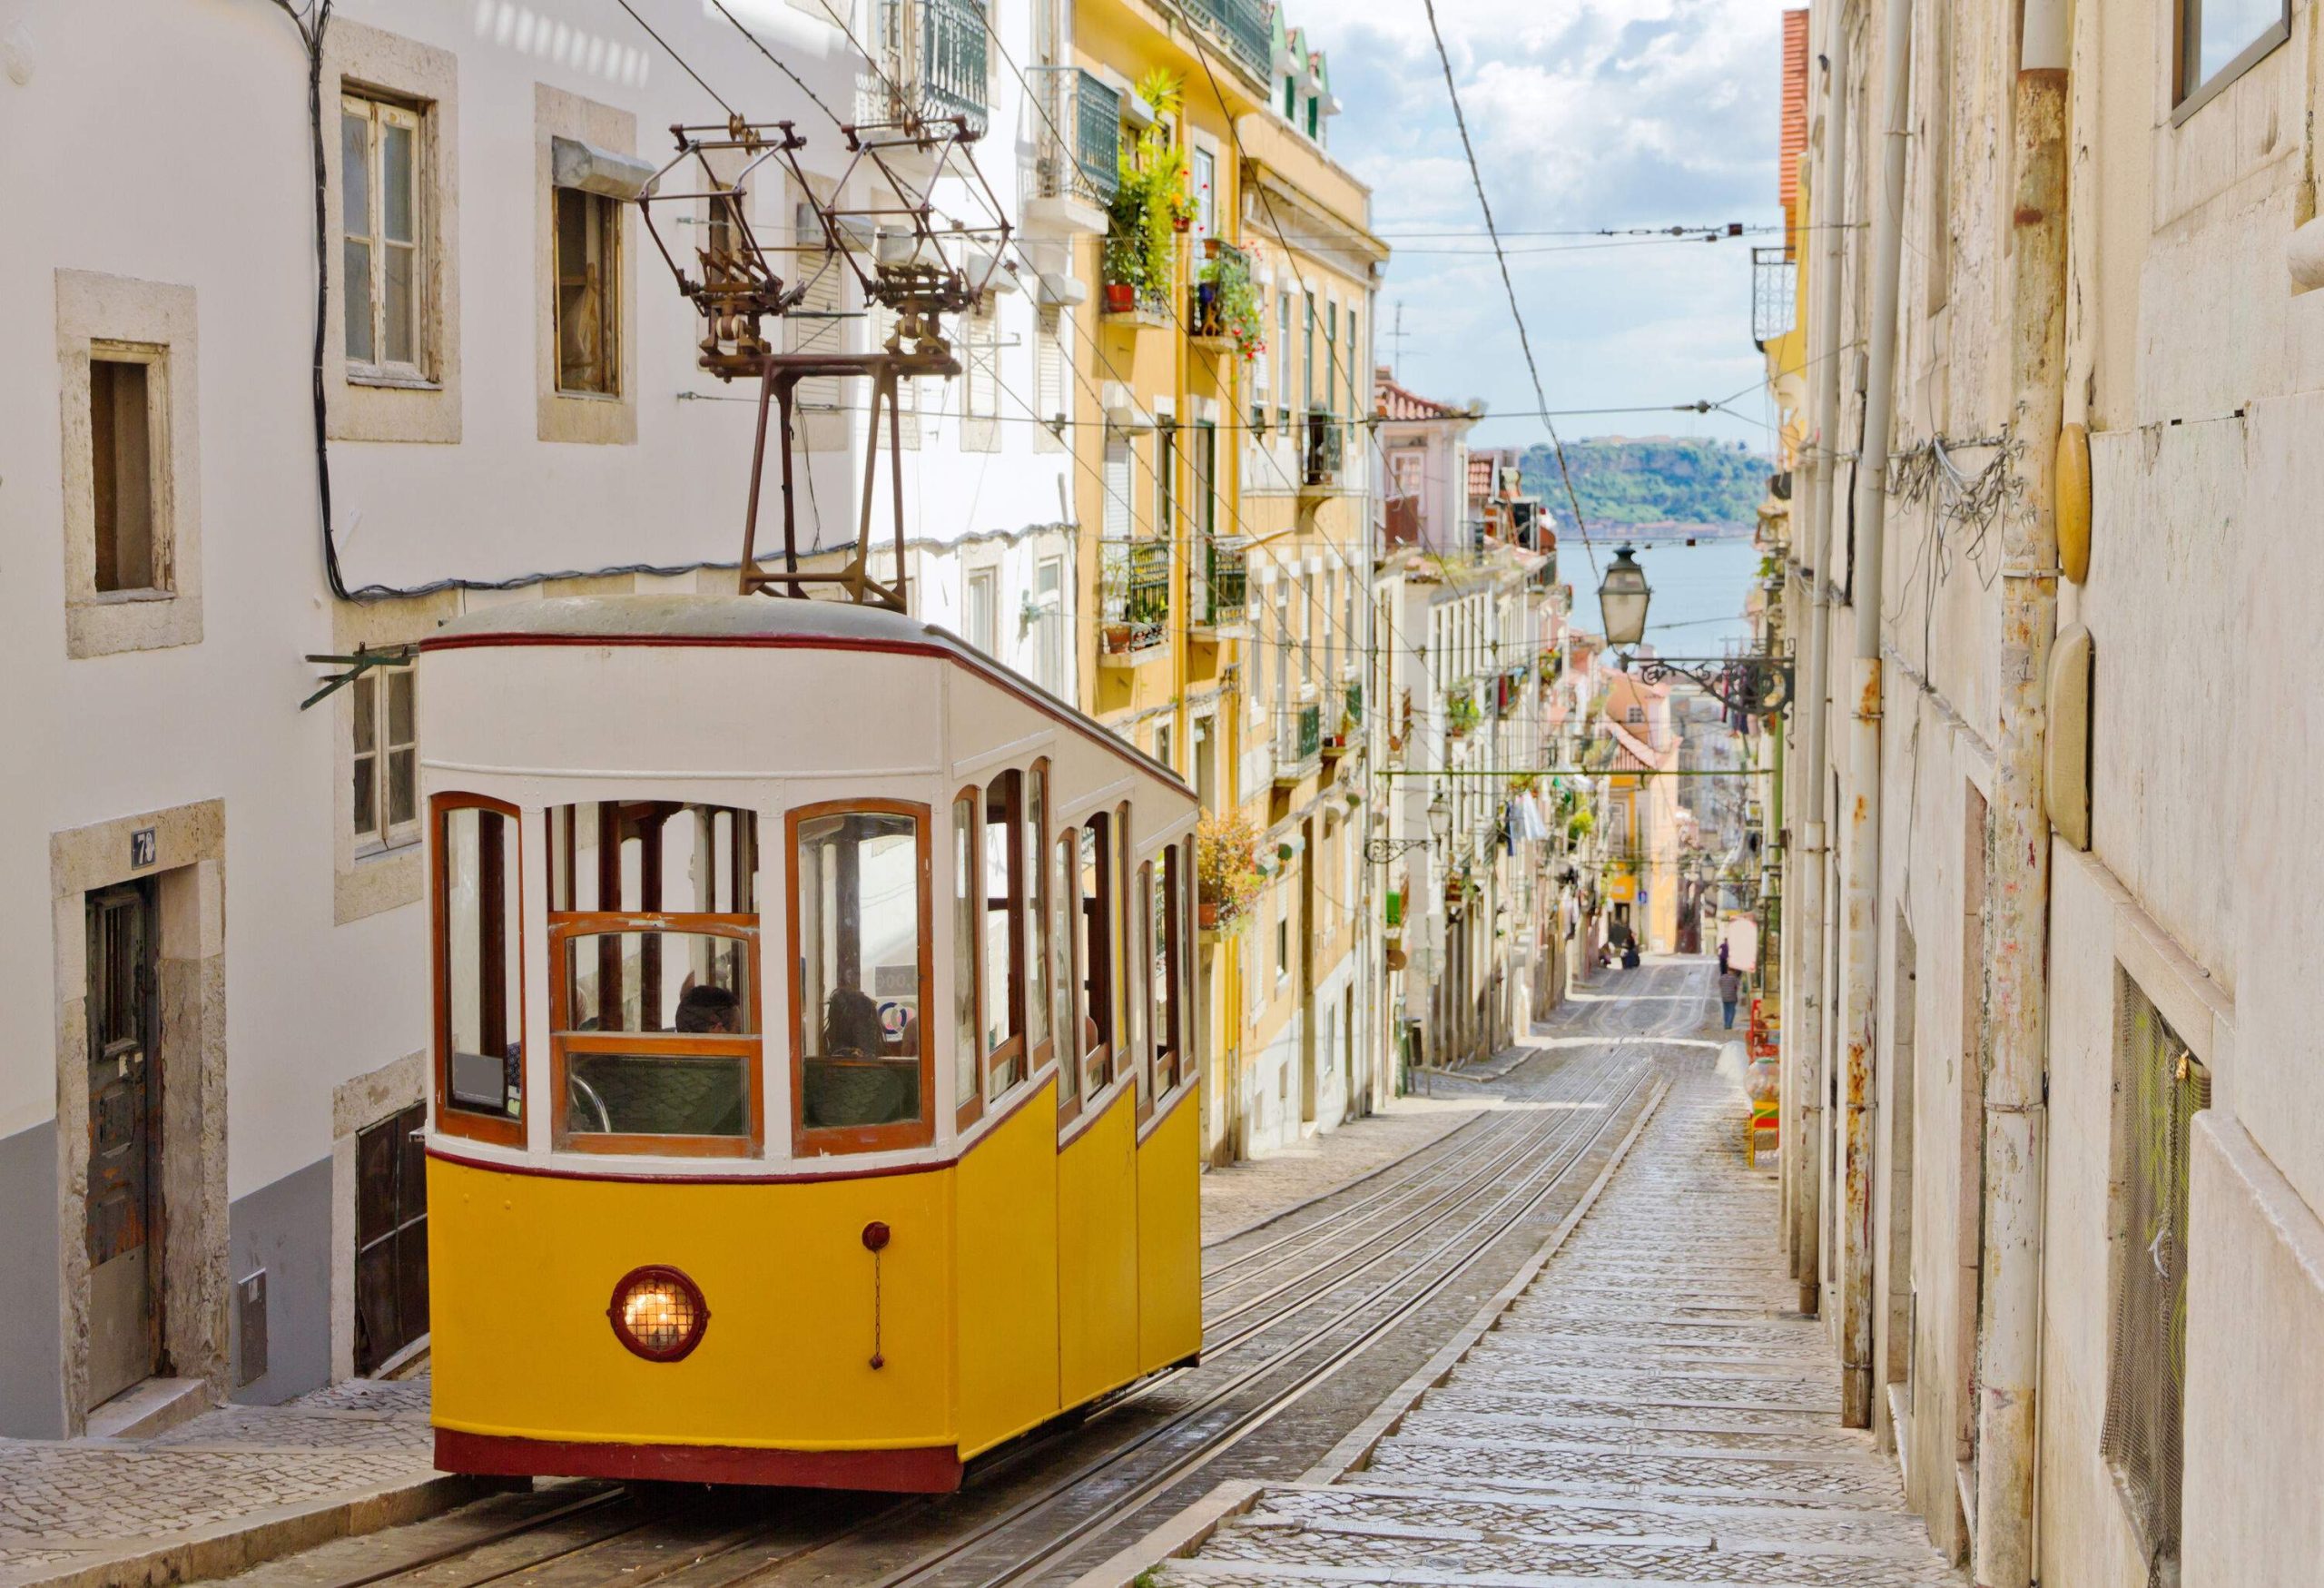 A yellow tram climbs the hill between colourful houses.